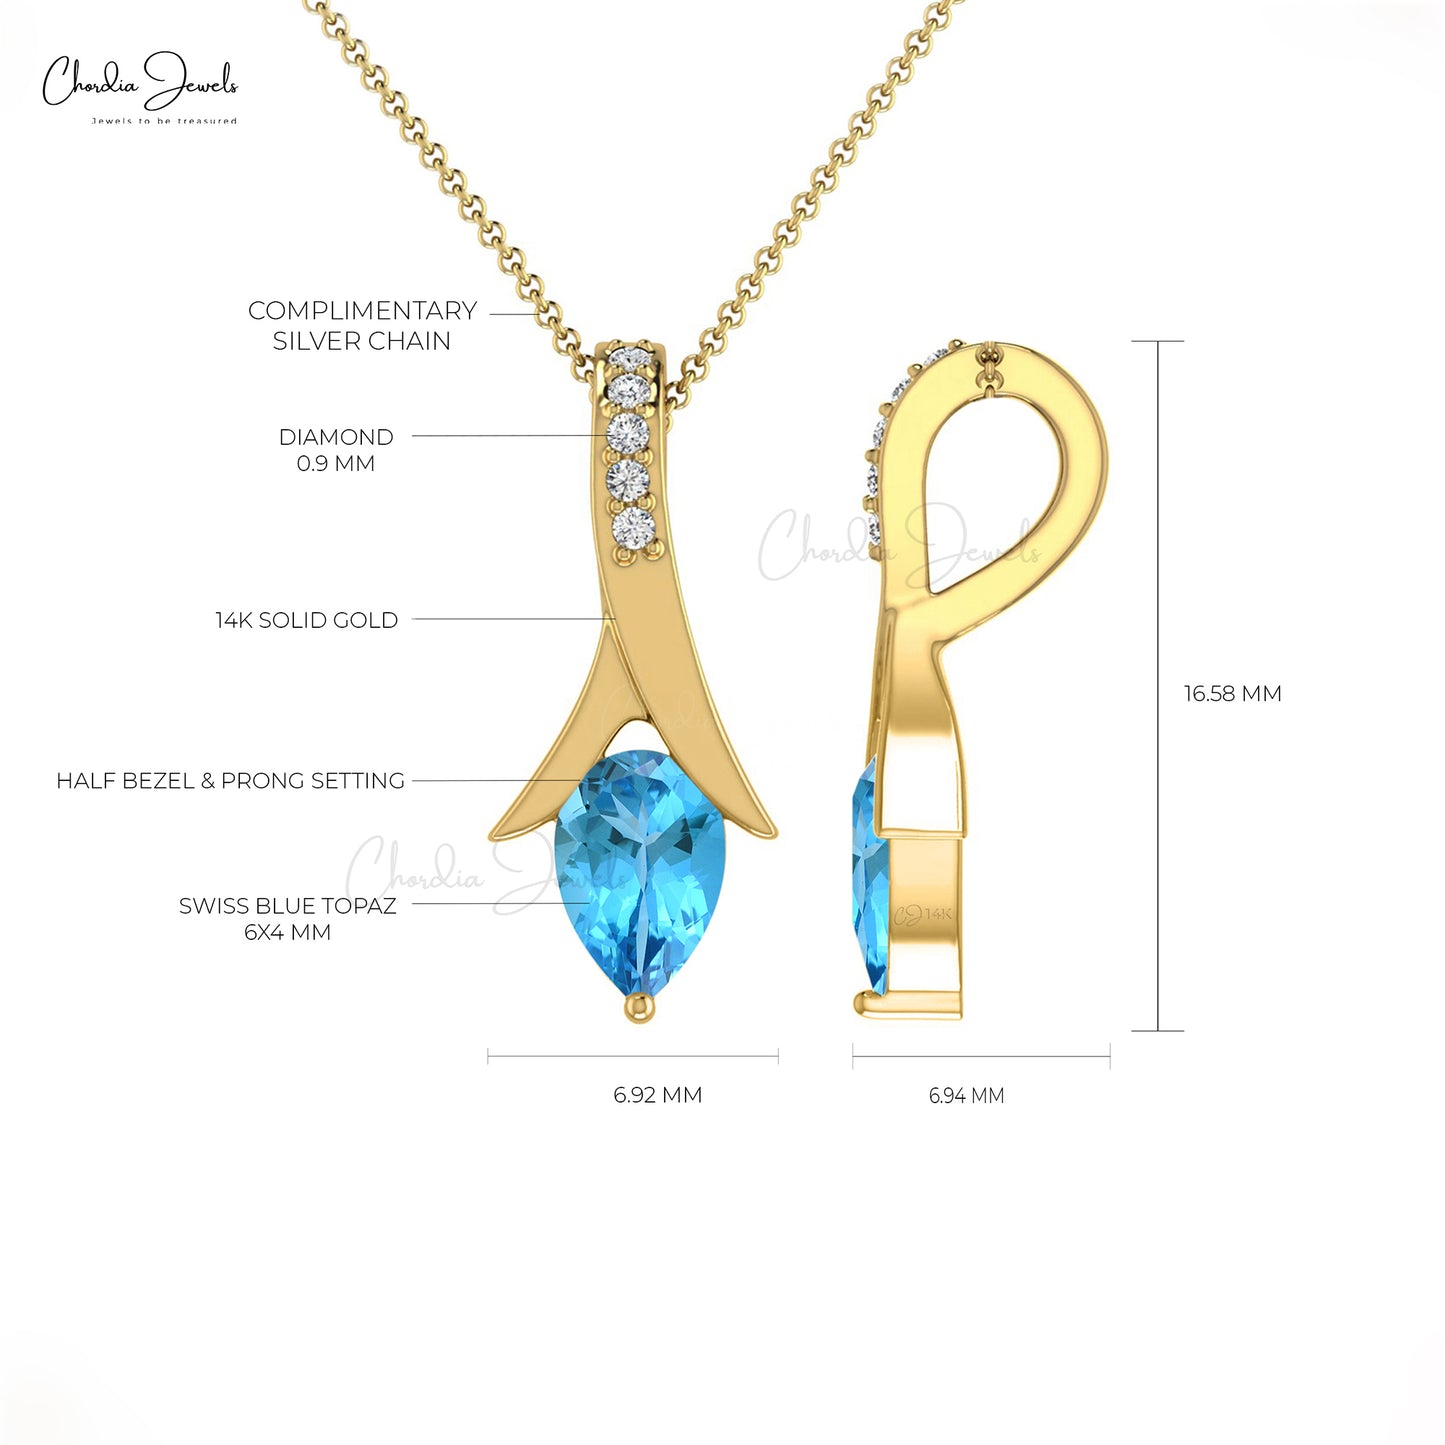 Load image into Gallery viewer, Natural Swiss Blue Topaz Handmade Pendant 14k Solid Gold Diamond Tear Drop Pendant 6X4mm Pear Cut Gemstone Handmade Jewelry For Anniversary Gift
